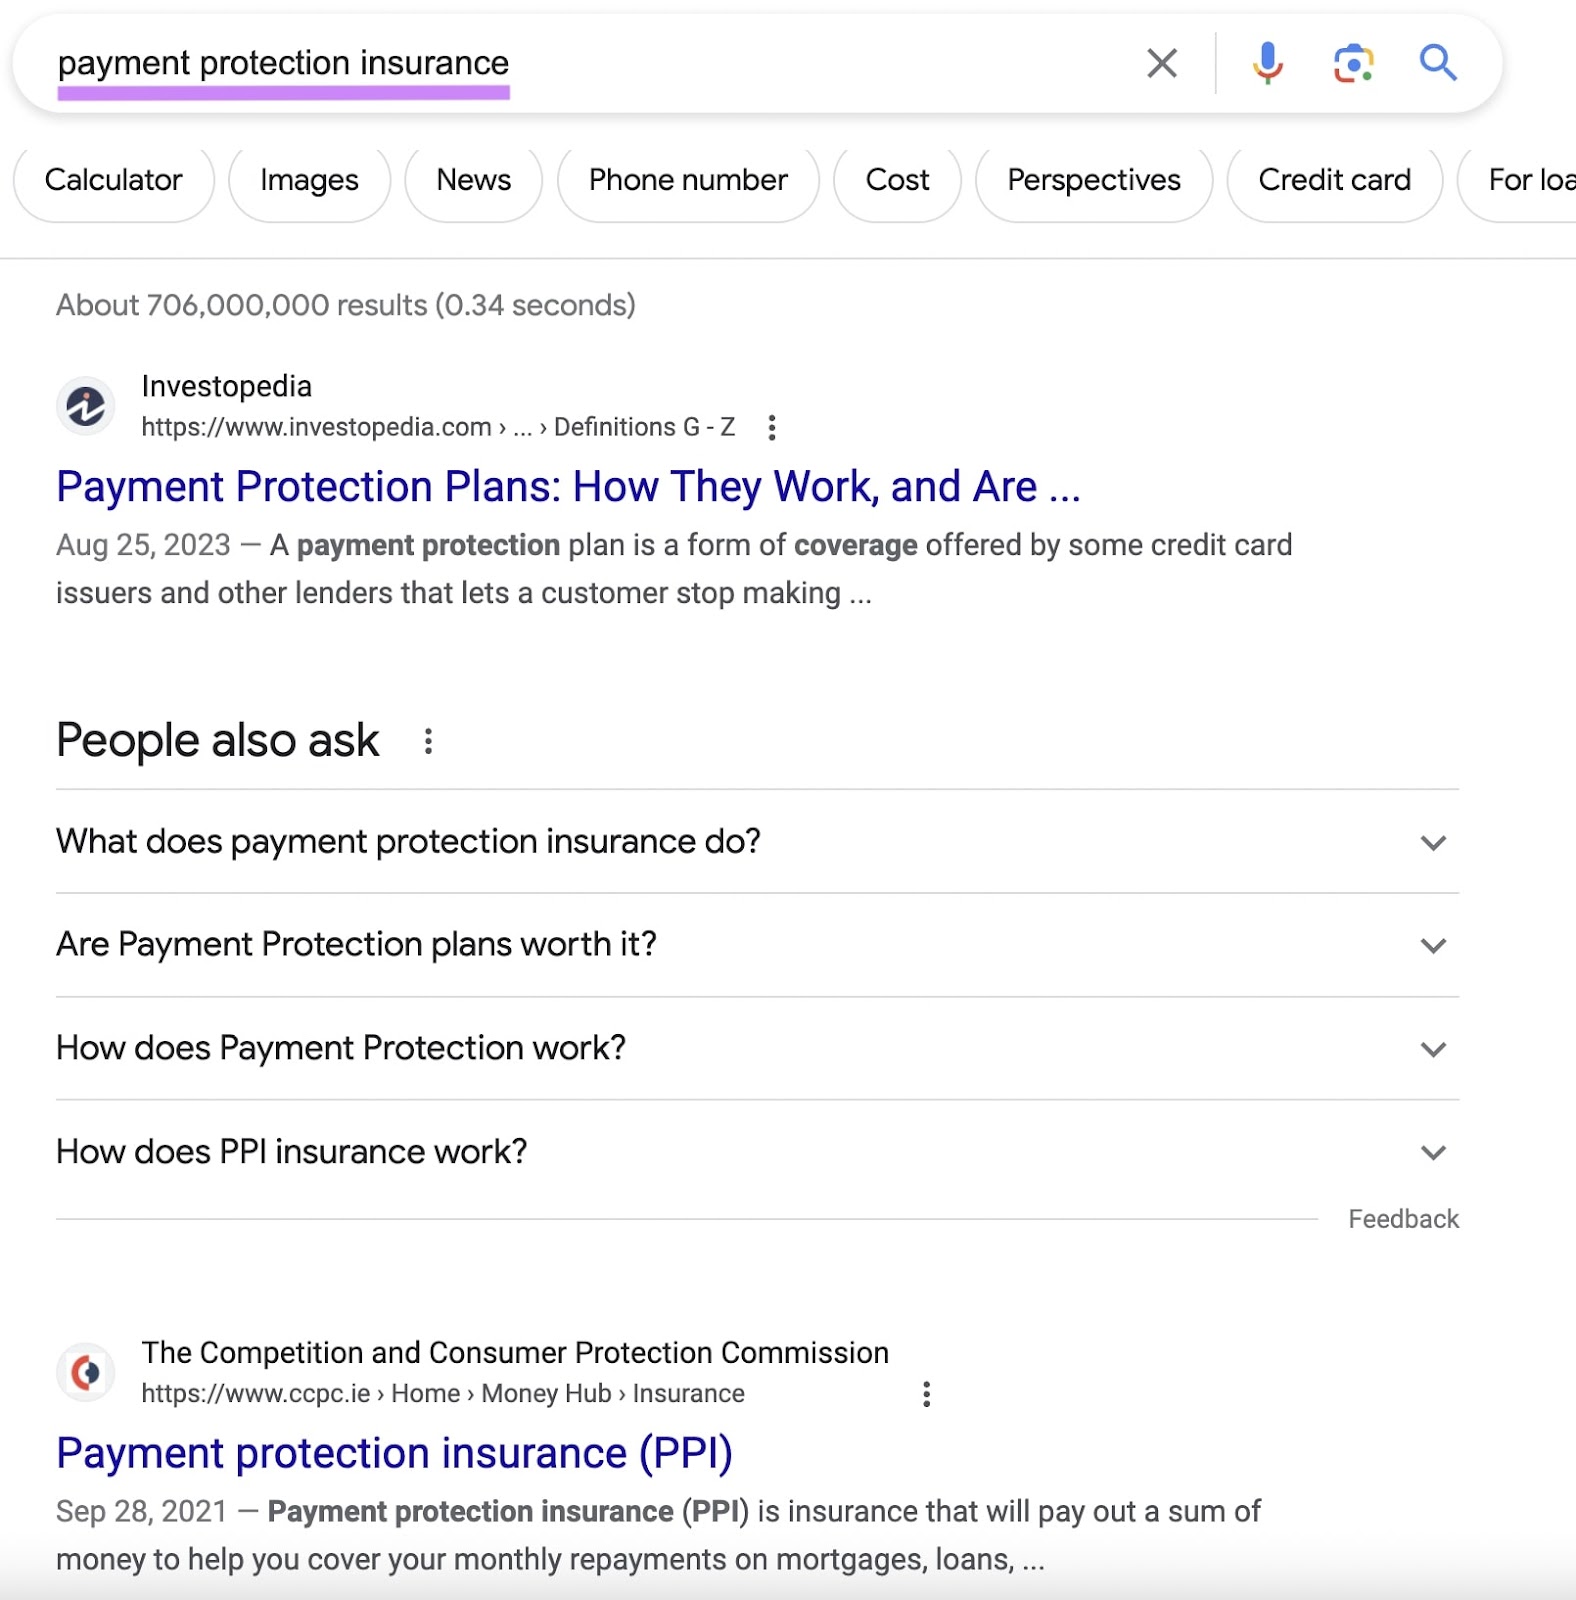 Google's SERP for “payment protection insurance" query